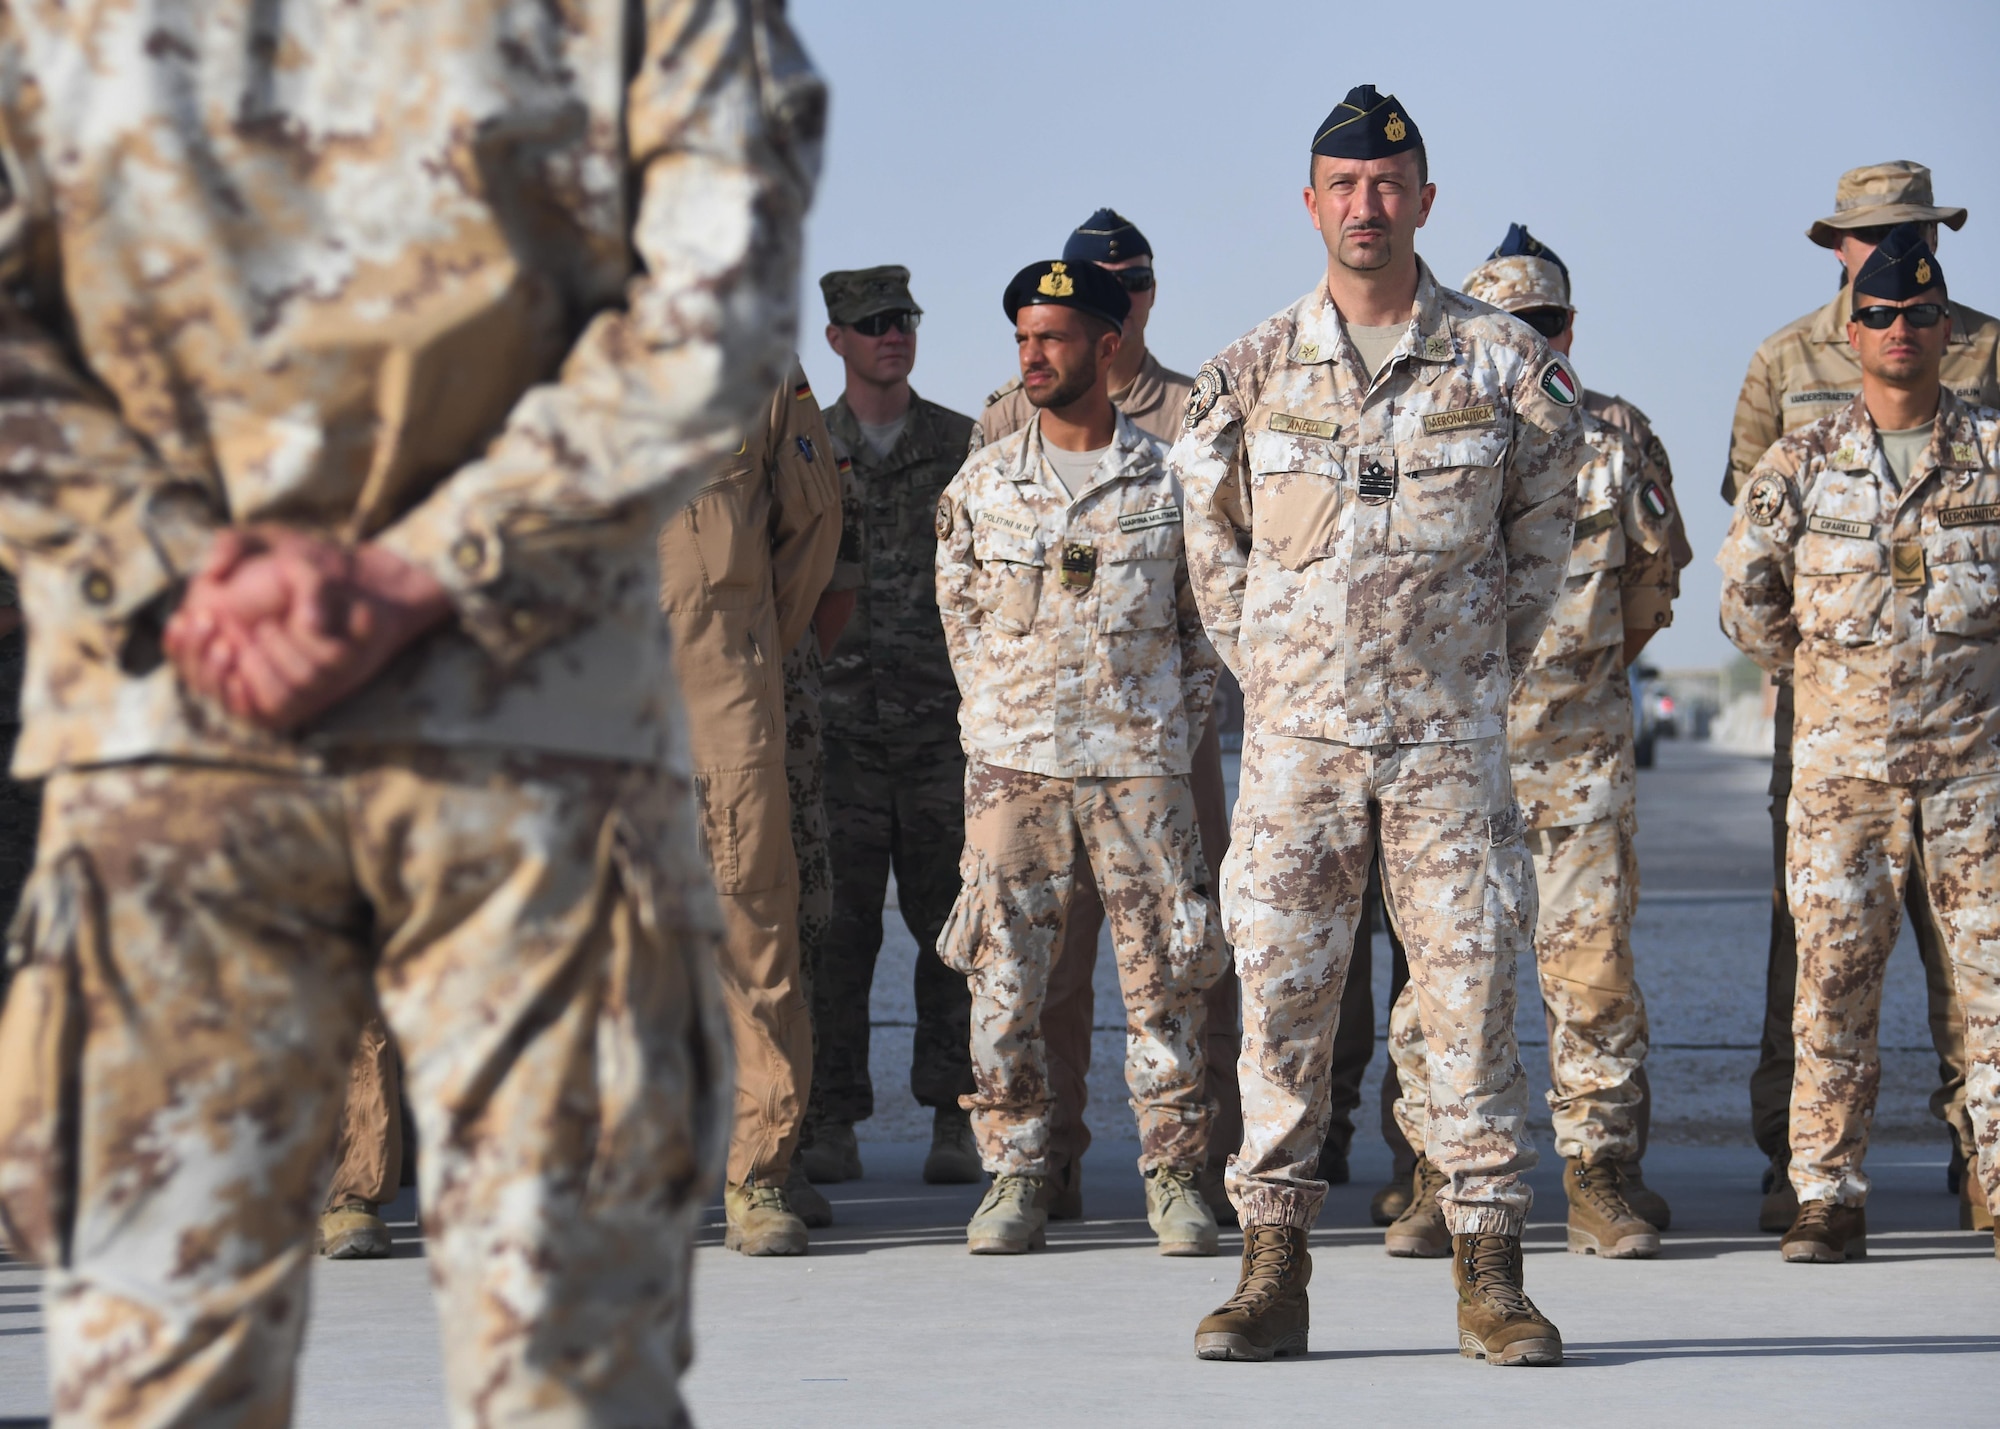 Members from the Italian Detachment at the Combined Air Operations Center stand in formation during the Italian Armed Forces Day ceremony at Al Udeid Air Base, Qatar Nov. 4, 2016. The ceremony was held in front of the Memorial Plaza and involved the raising of the Italian flag, a moment of silence and the presentation of certificates of appreciation. (U.S. Air Force photo by Senior Airman Miles Wilson)